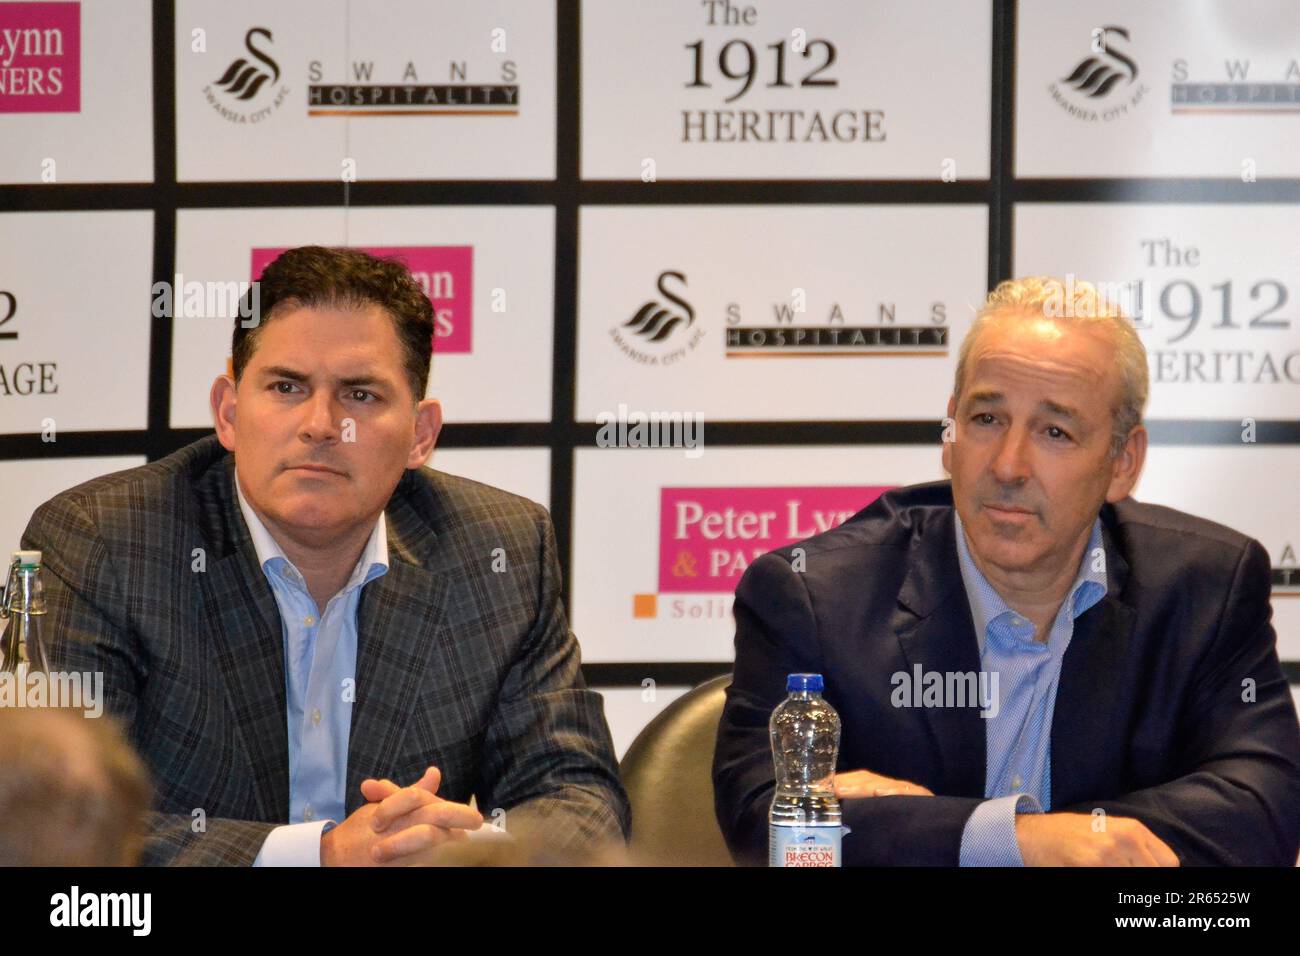 Swansea, Wales. 4 April 2017. Swansea City co-owner Jason Levien (left) and Swansea City co-owner Steve Kaplan during the Swansea City Supporters' Trust Fans Forum at the Liberty Stadium in Swansea, Wales, UK on 4 April 2017. Credit: Duncan Thomas/Majestic Media. Stock Photo